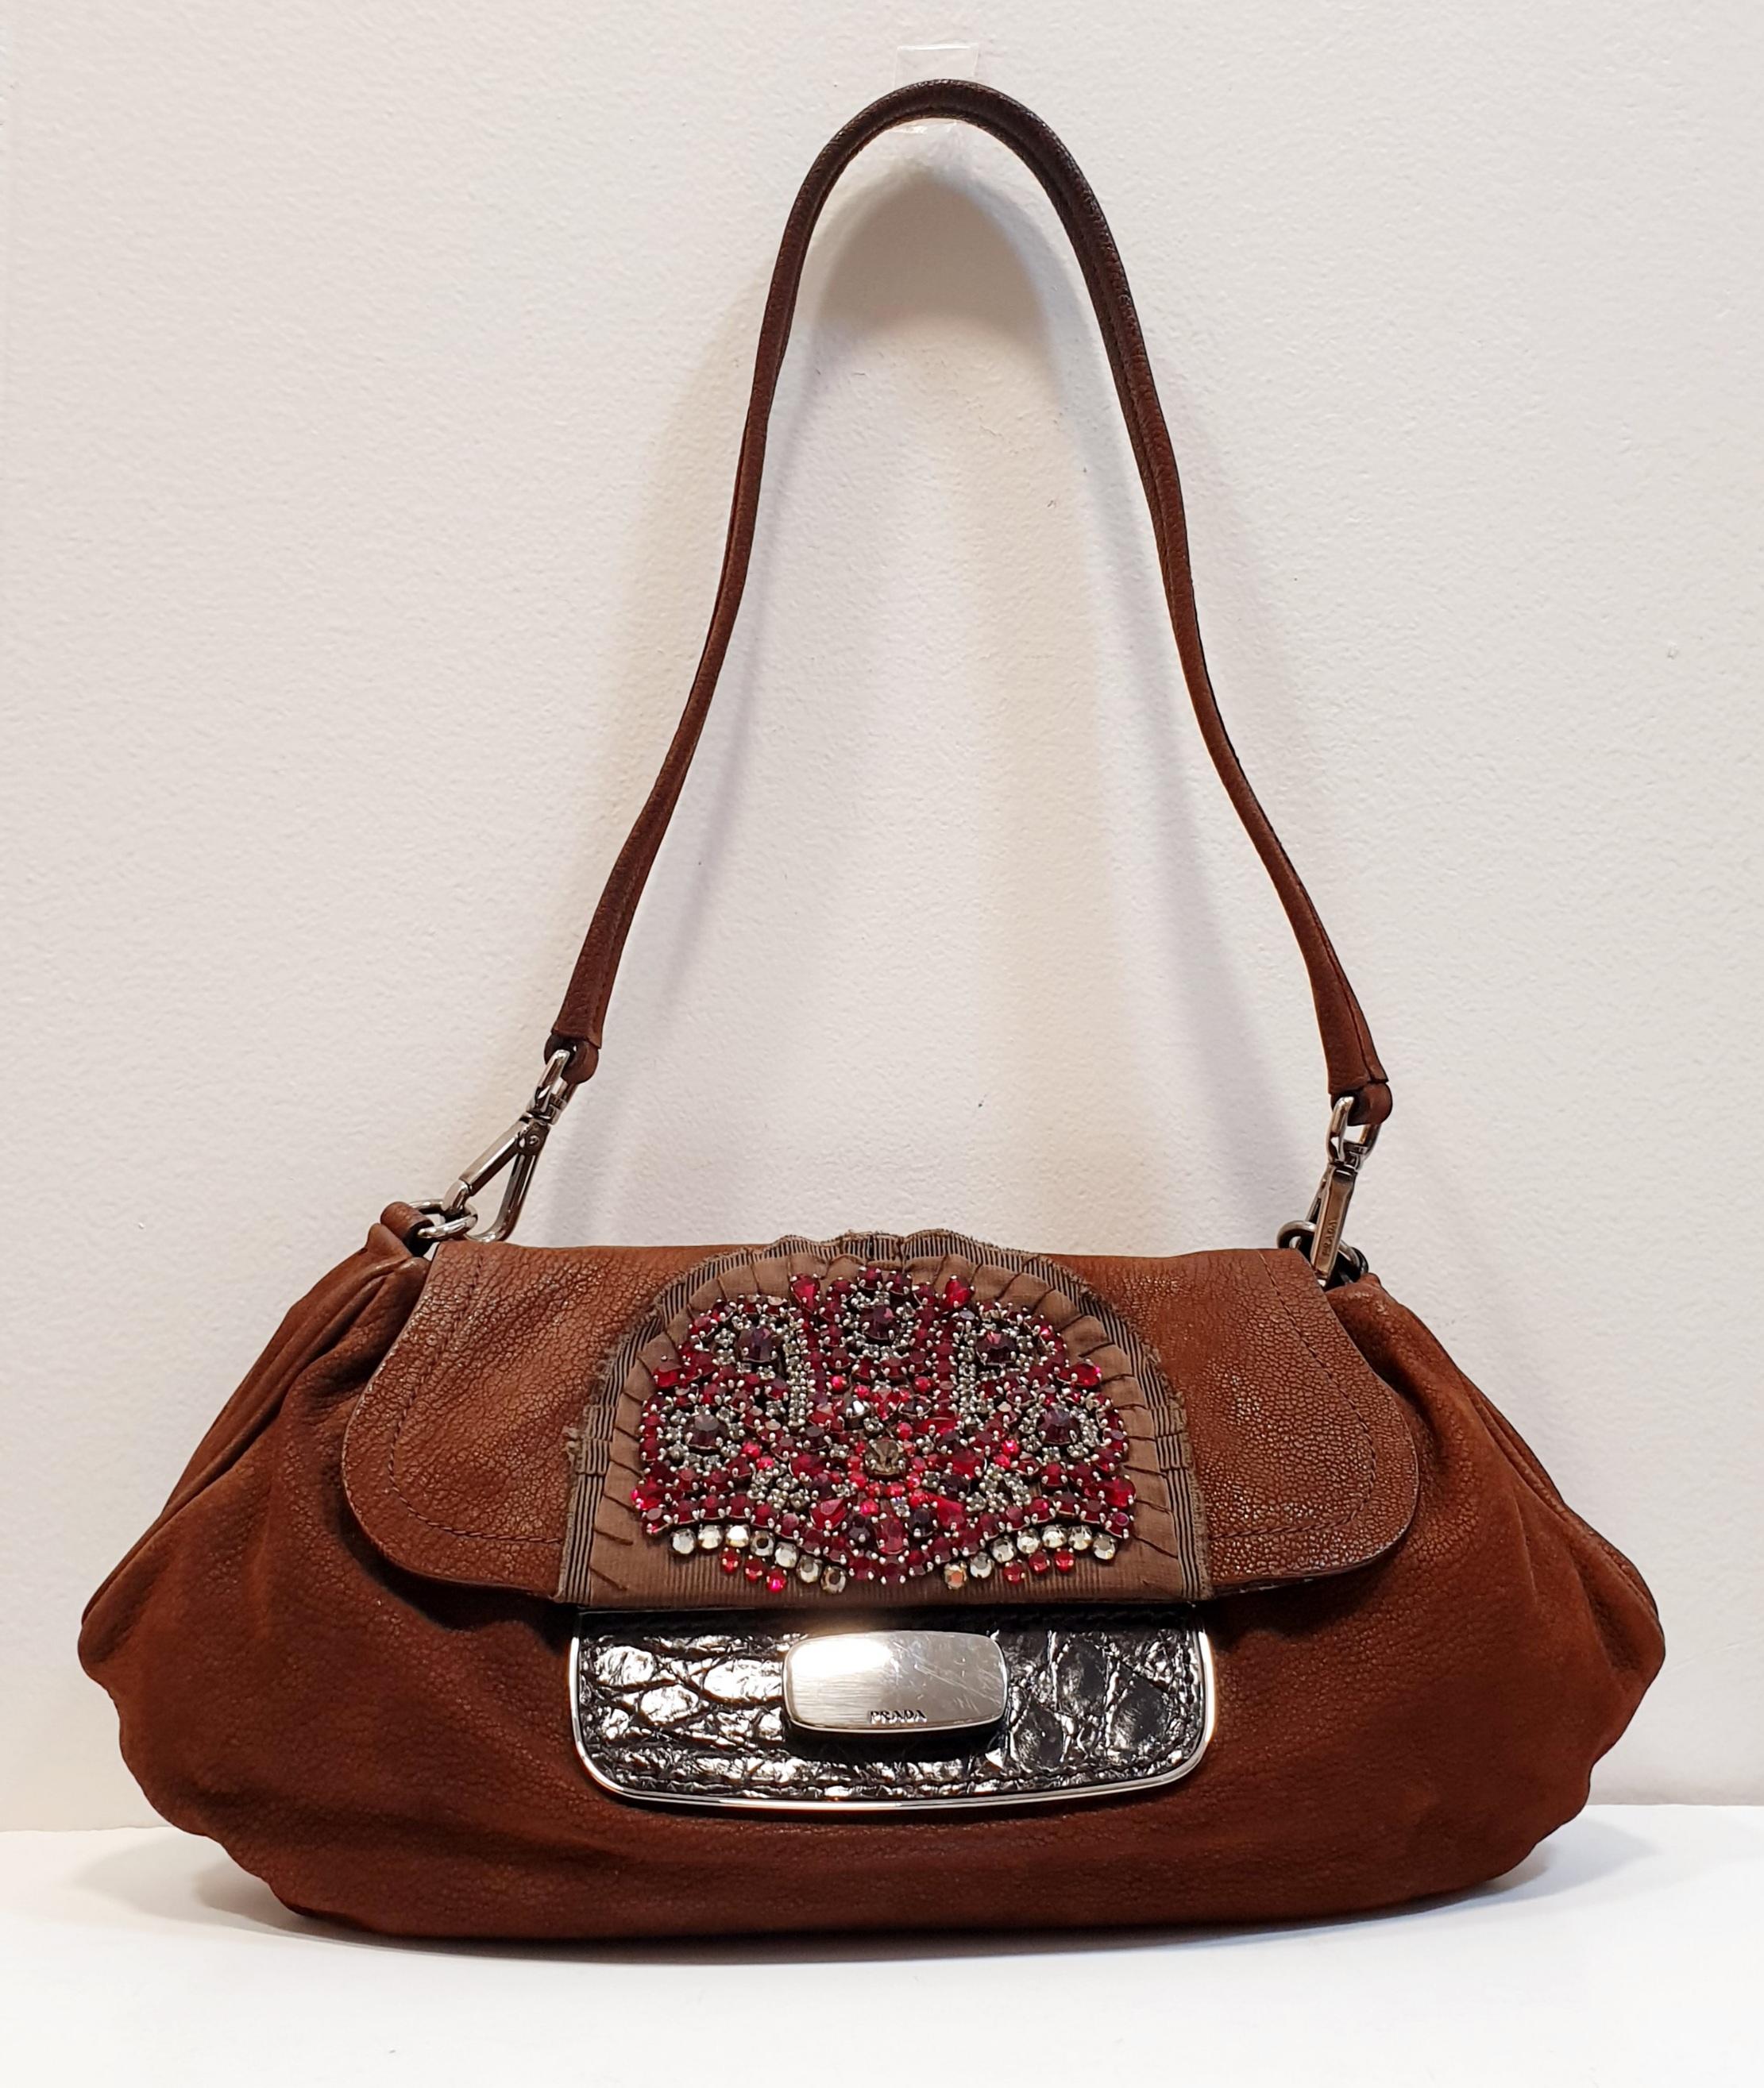 Prada Vintage bag with beaded detail and crocodile leather closure.
Width: 34 cm/ 13,38 inches
Height: 17 cm/ 6,69 inches
Depth: 7 cm/ 2,75 inches
Color: Brown
Authenticity card: No
Dustbag: Yes
Vintage: Yes
Condition: Good

READY TO SHIP
*Shipment